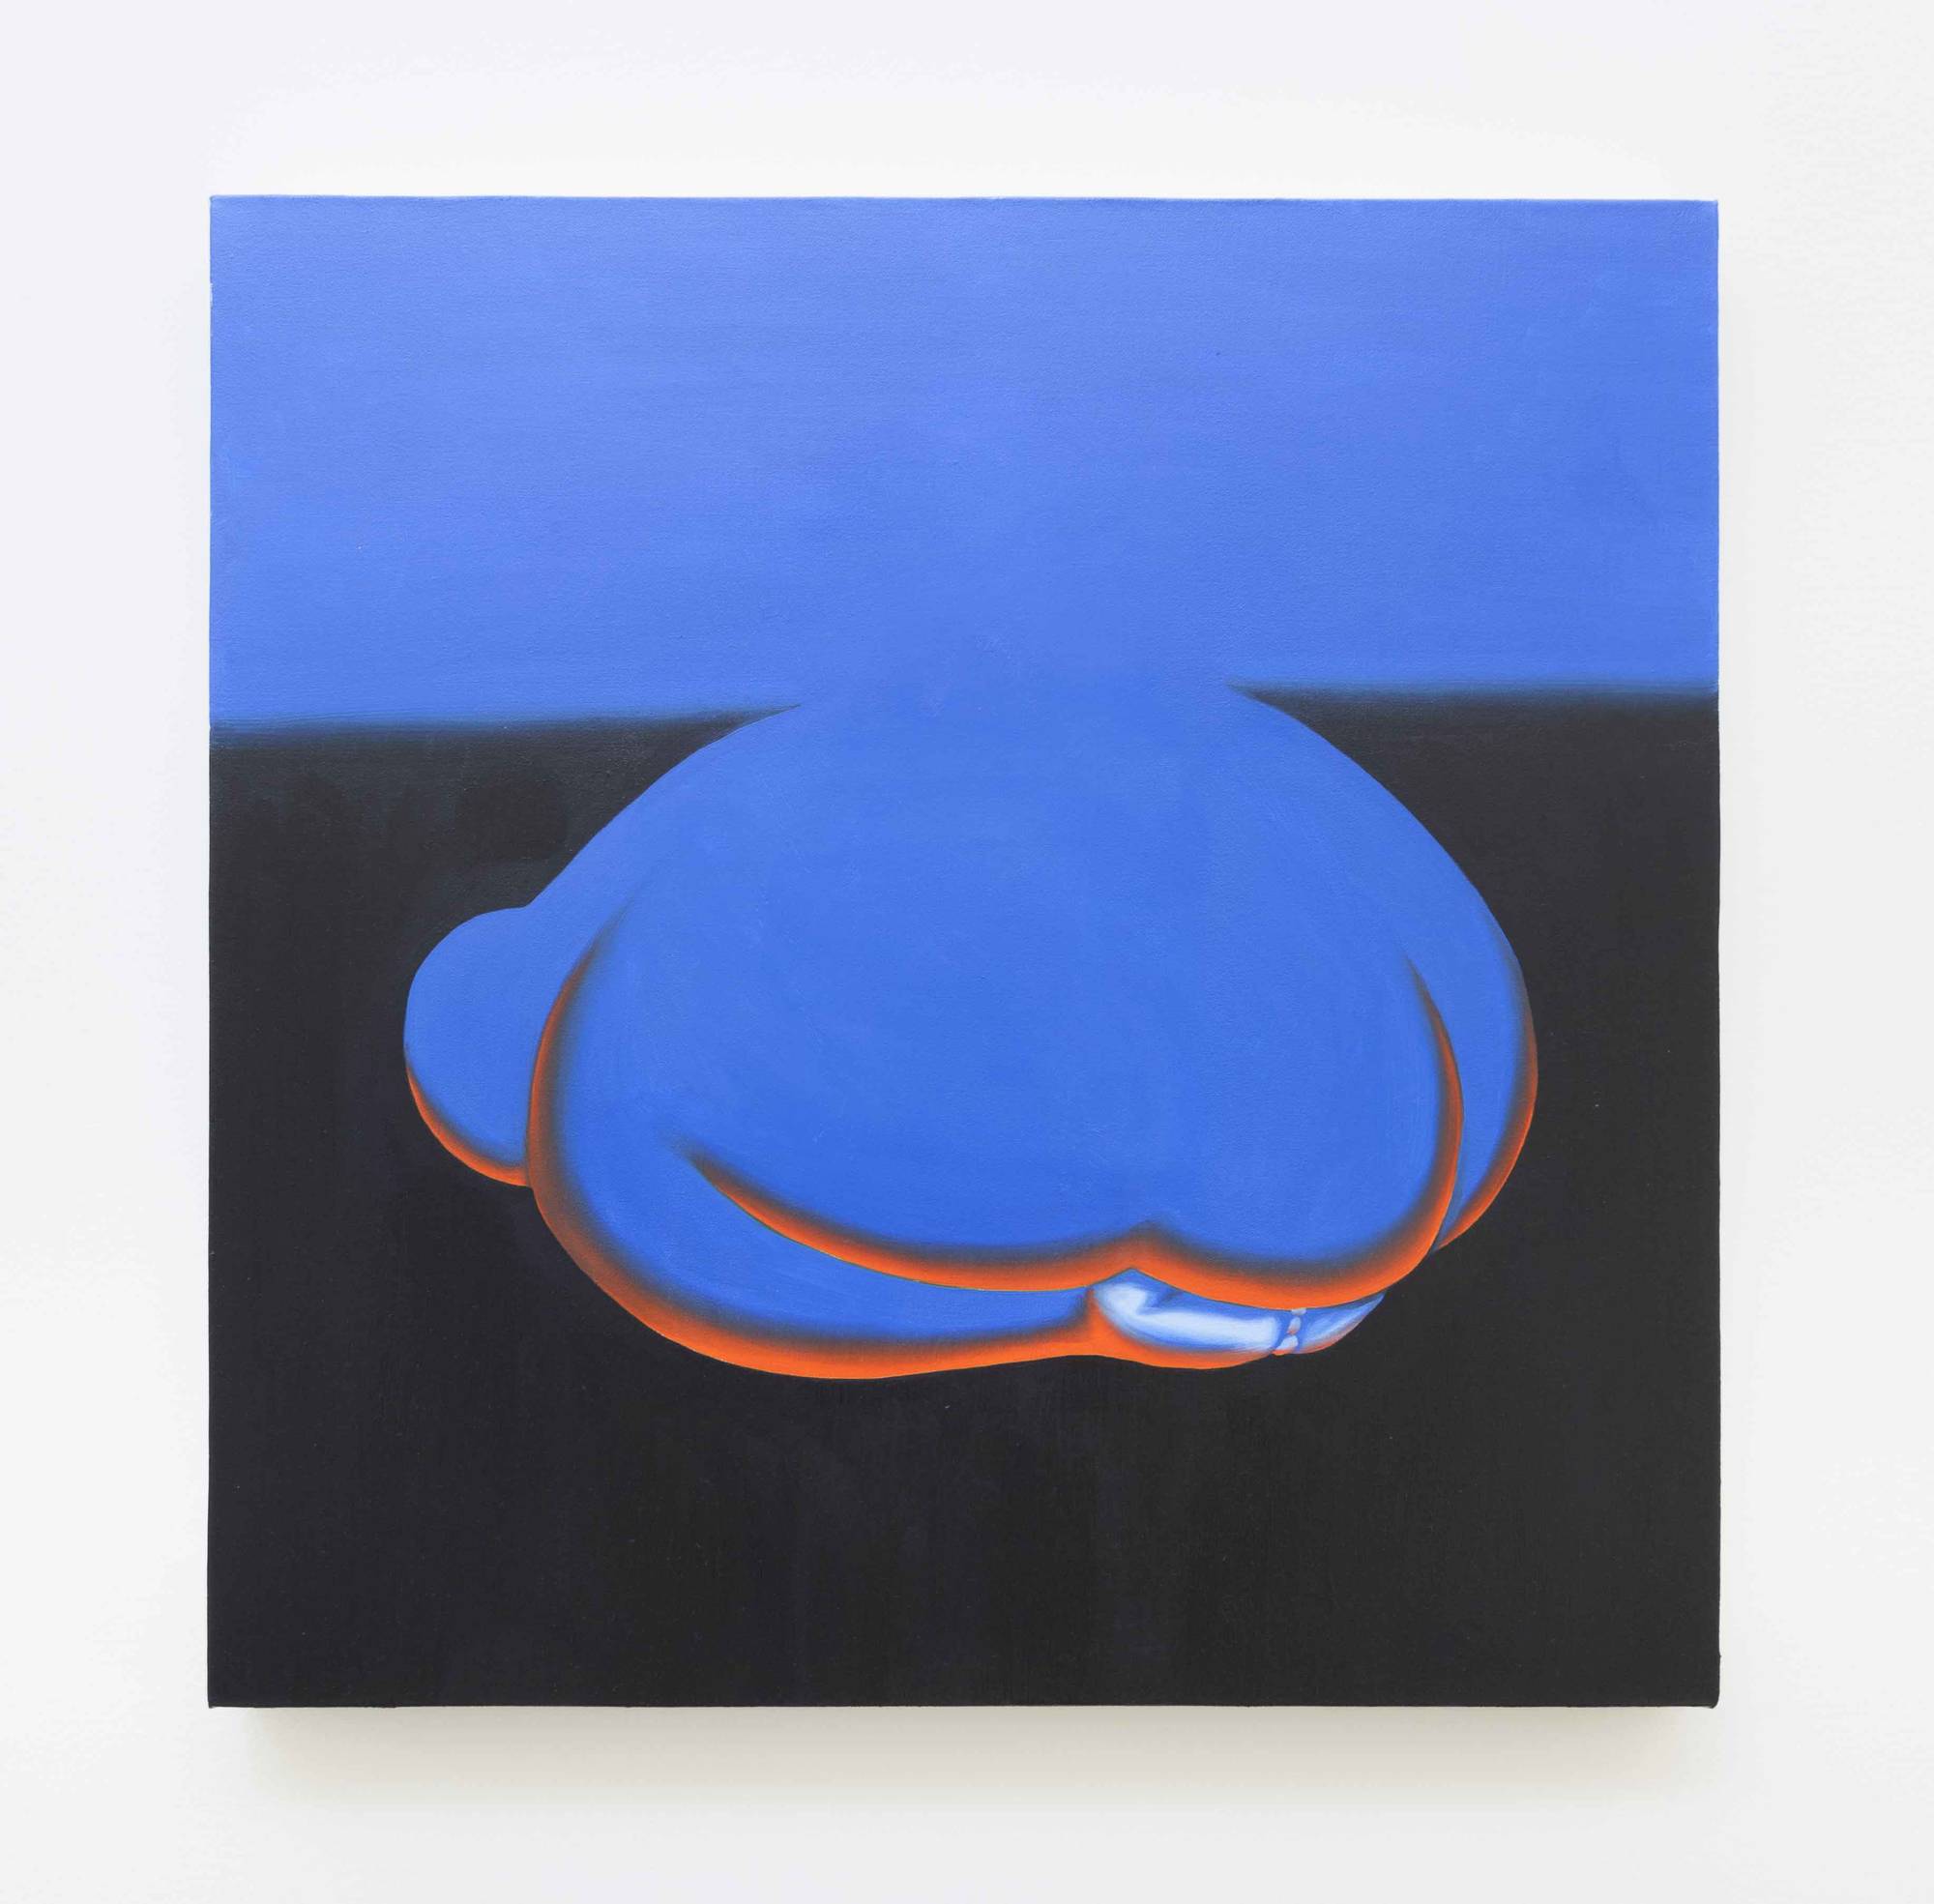 Brittney Leeanne Williams. "Blue Desert," 2018, oil on canvas, 24 x 24 in. (61 x 61 cm). Photo courtesy of the artist and Monique Meloche Gallery, Chicago.